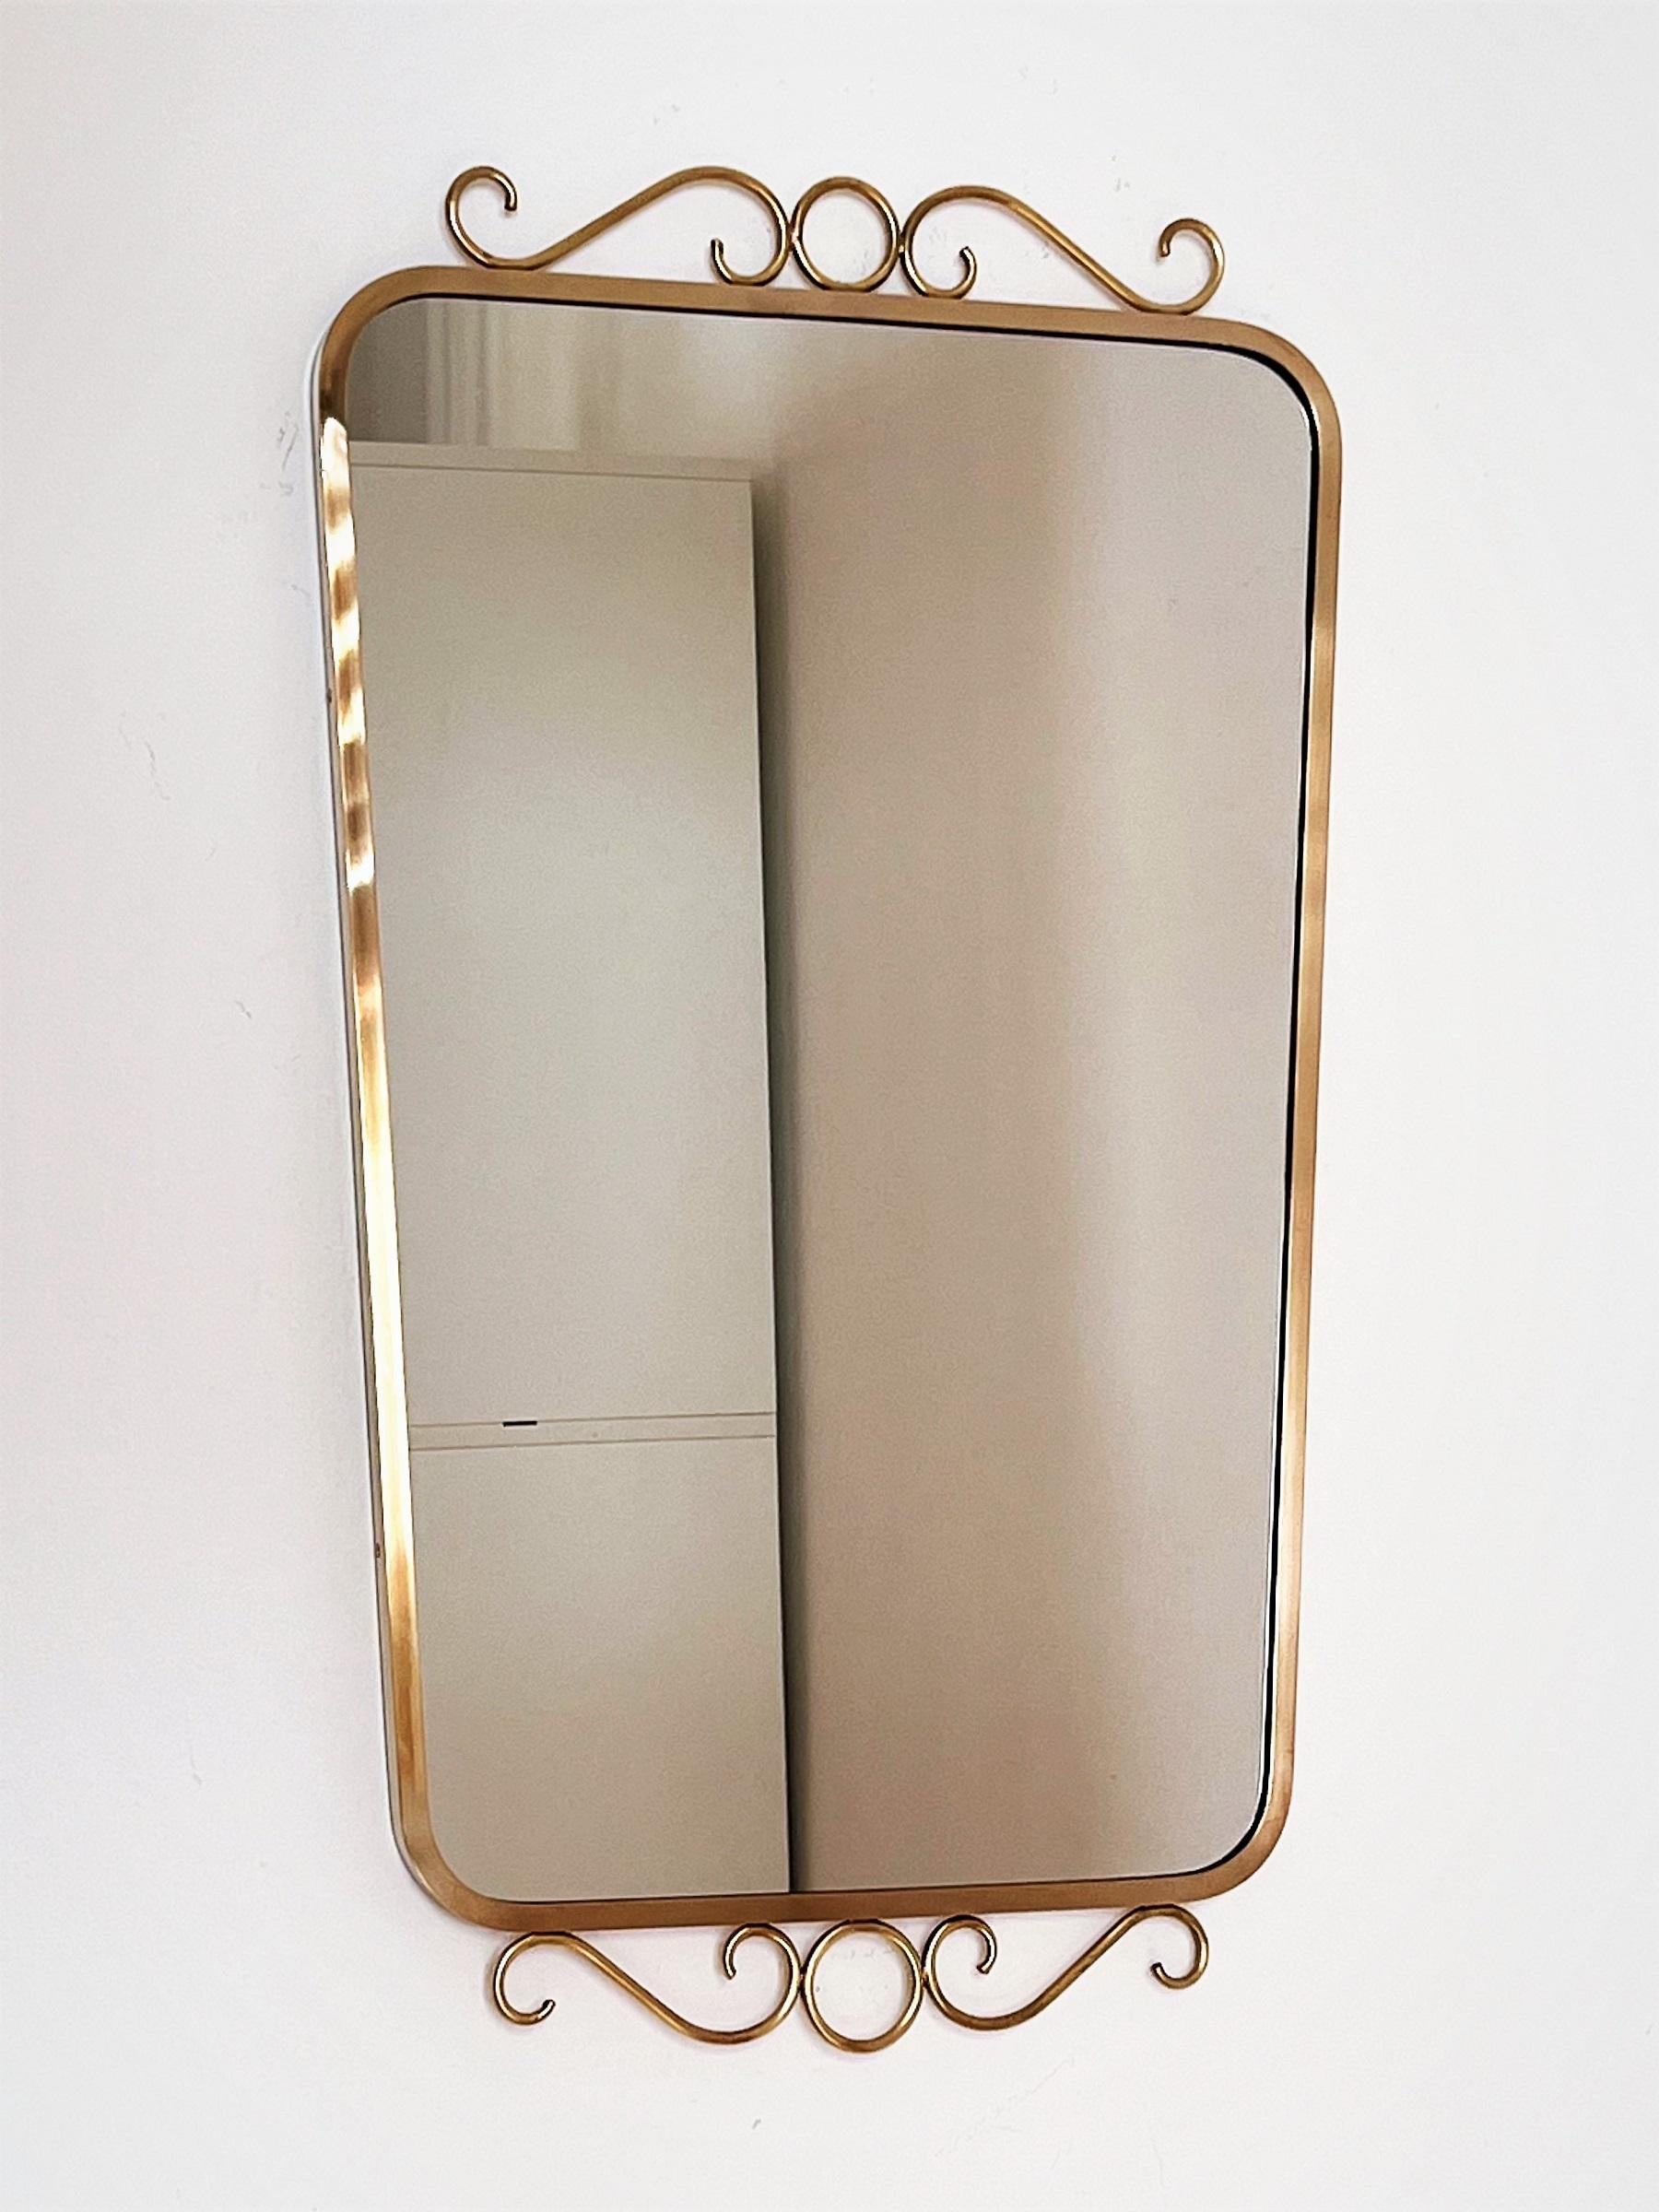 Beautiful and elegant crystal glass mirror with shiny brass frame and curly decorations on the top and below, in the style of Gio Ponti. 
Made in Italy in the 1970s circa.
The brass frame was polished and is now in beautiful shiny condition.
The